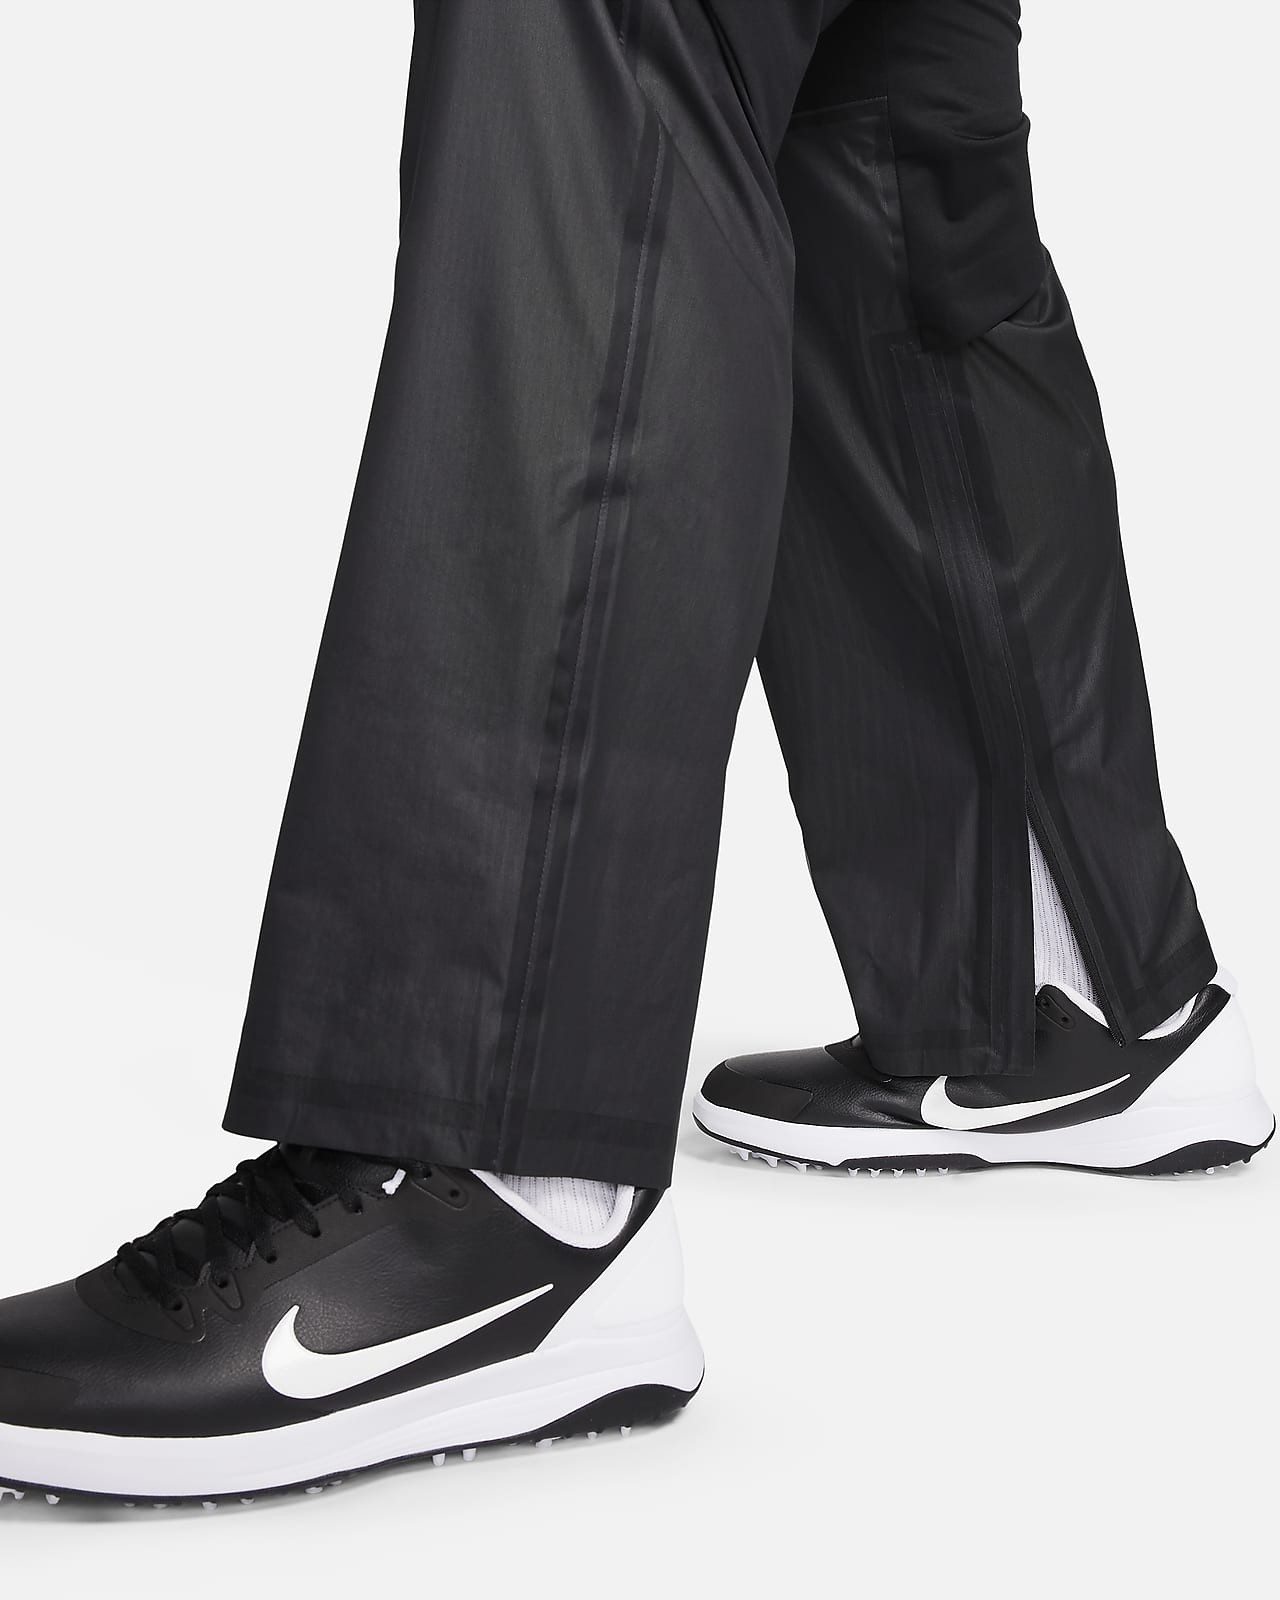 Nike Golf Clothing  Buy Mens Shirts, Trousers, Golf Shoes